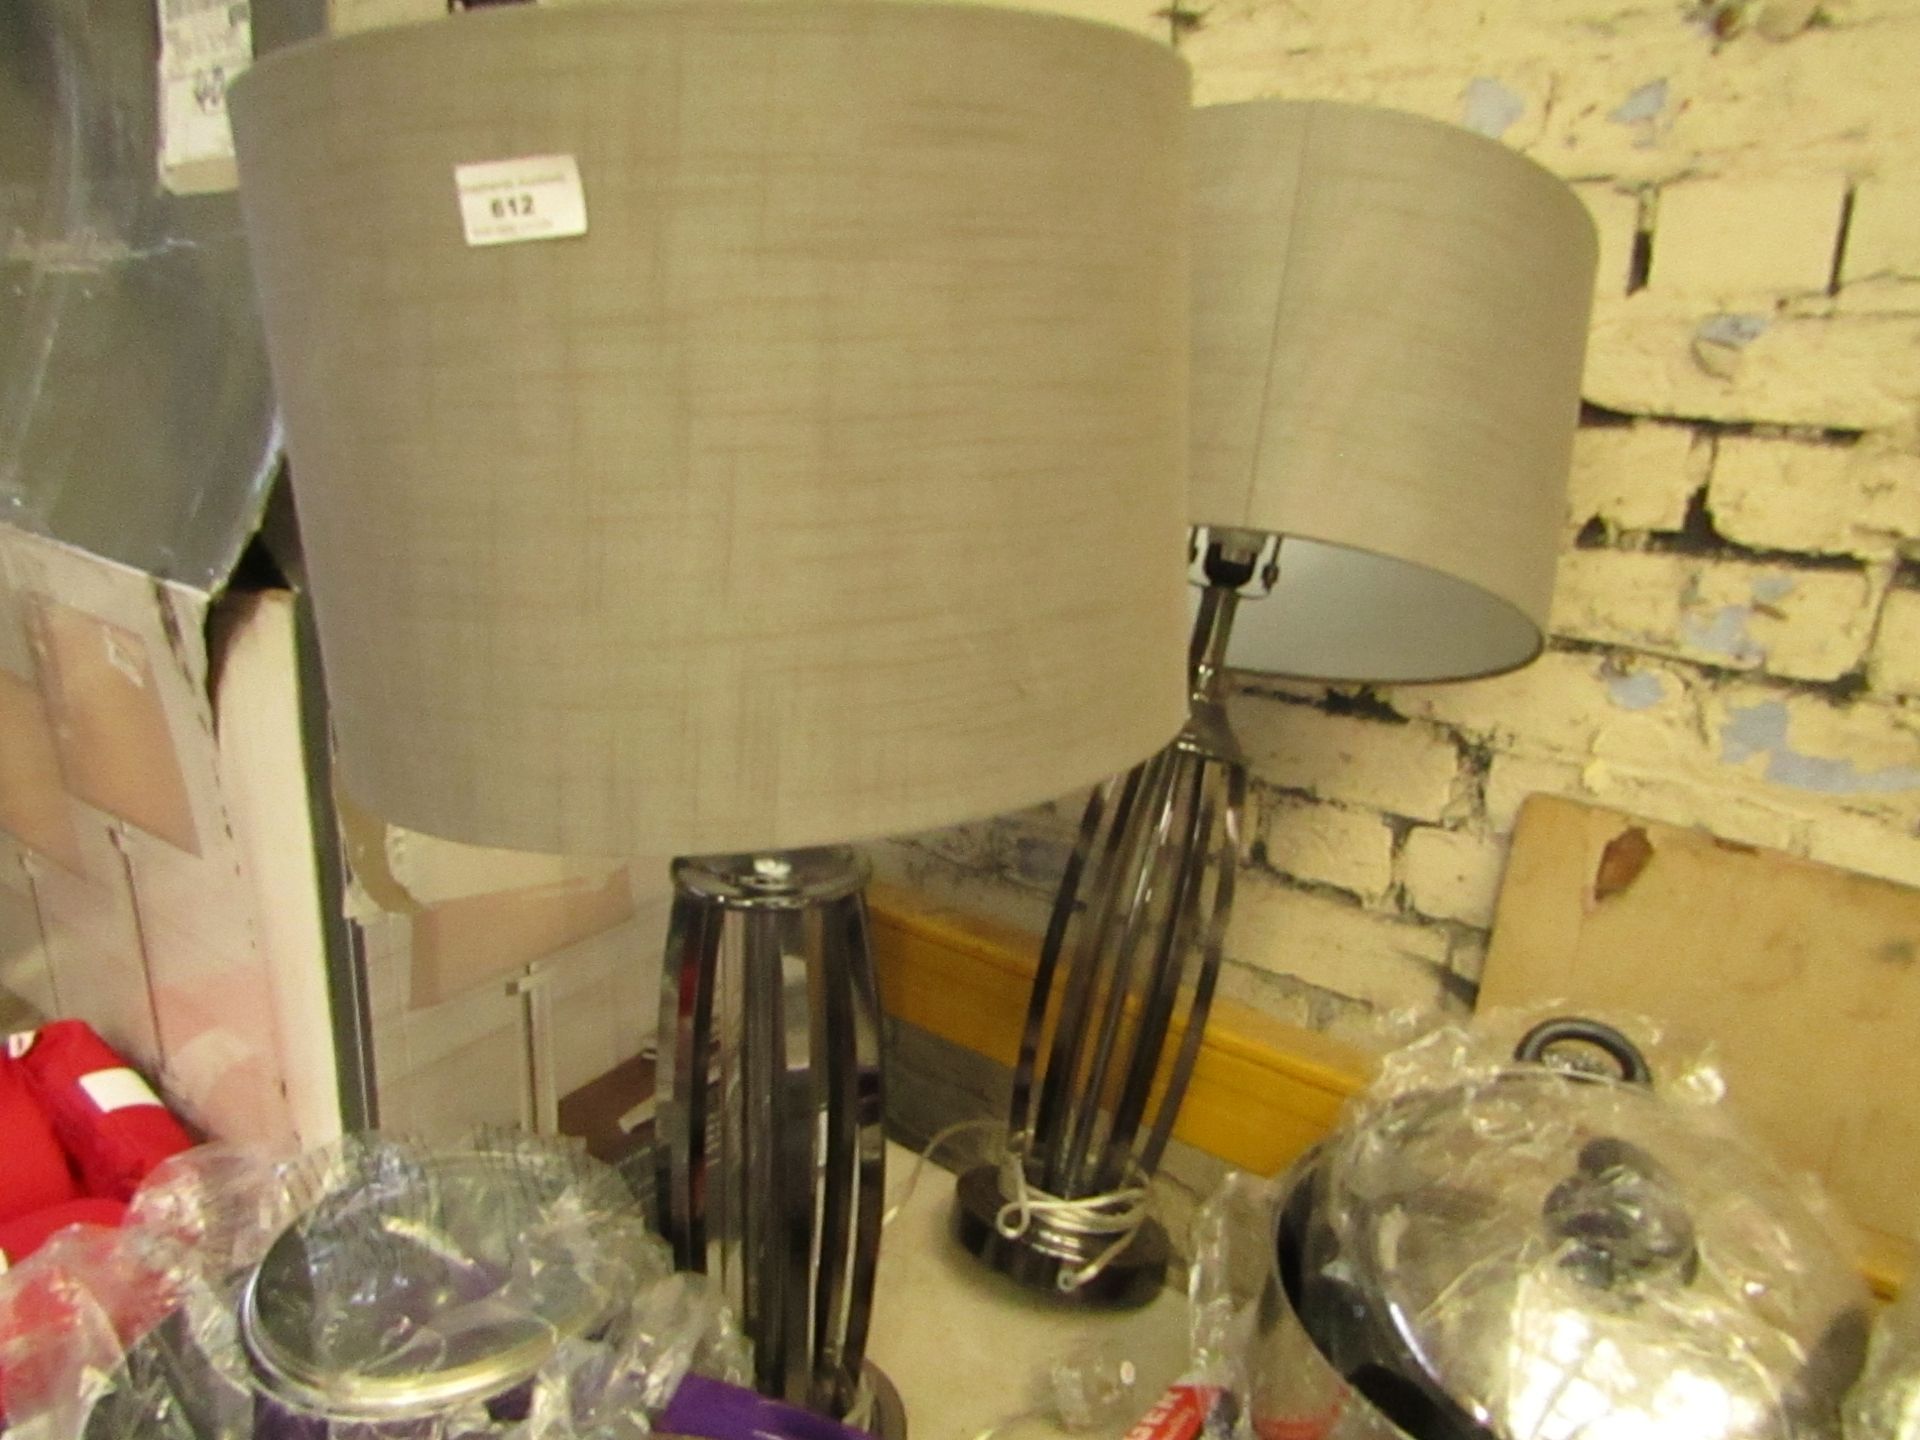 2x Costco Stainless steel table lamps, unchecked